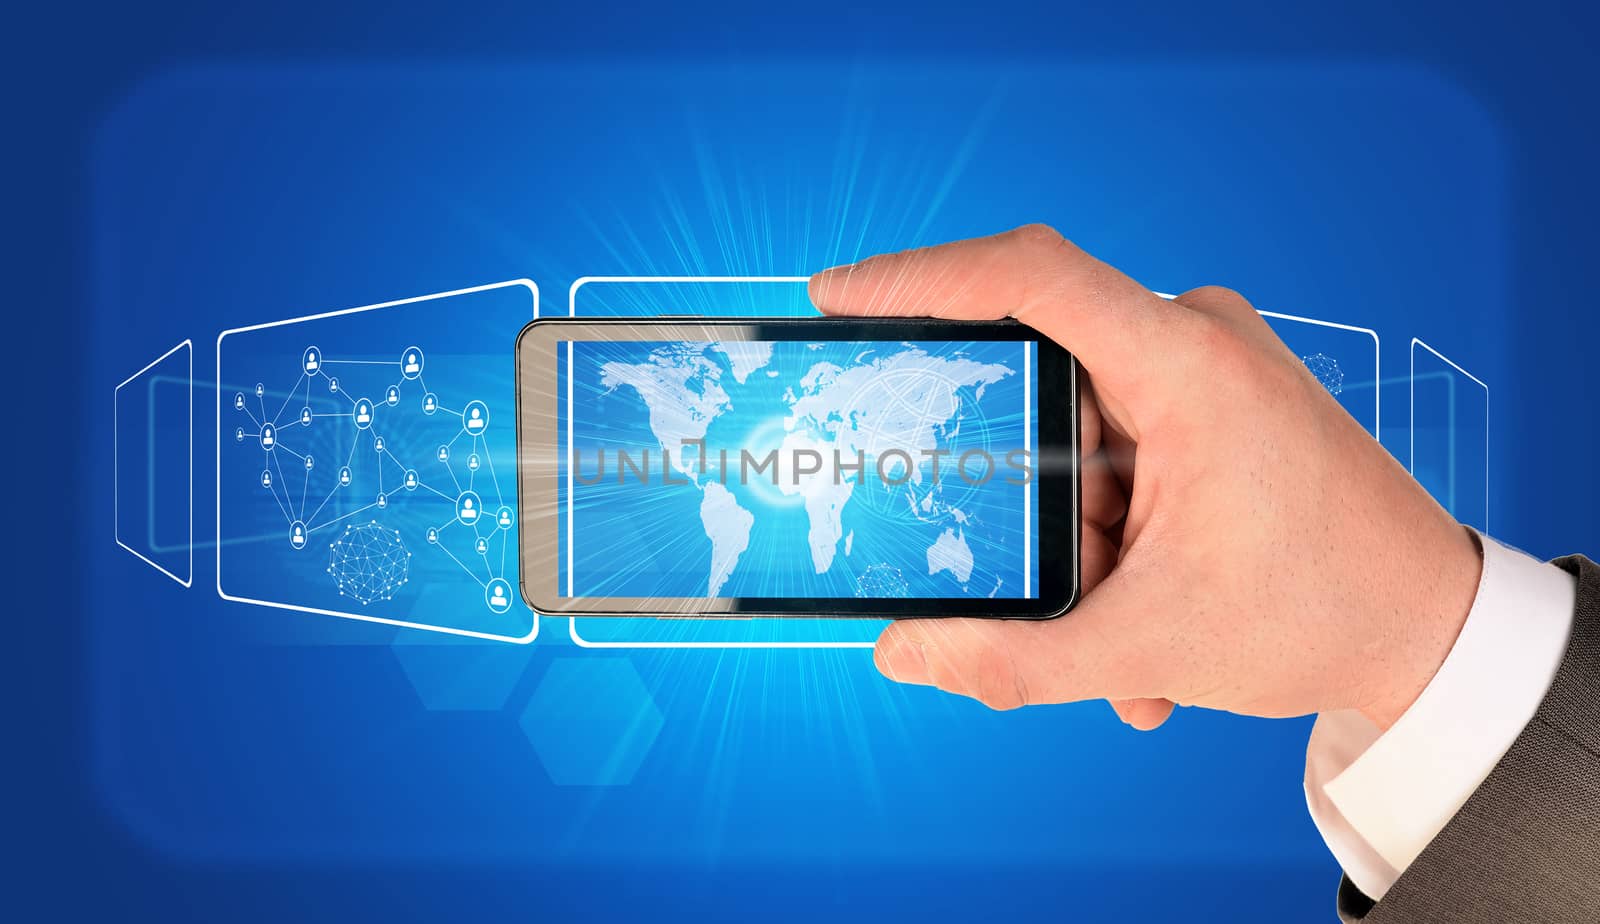 Man hand holding smart phone. Image of world map on phone screen